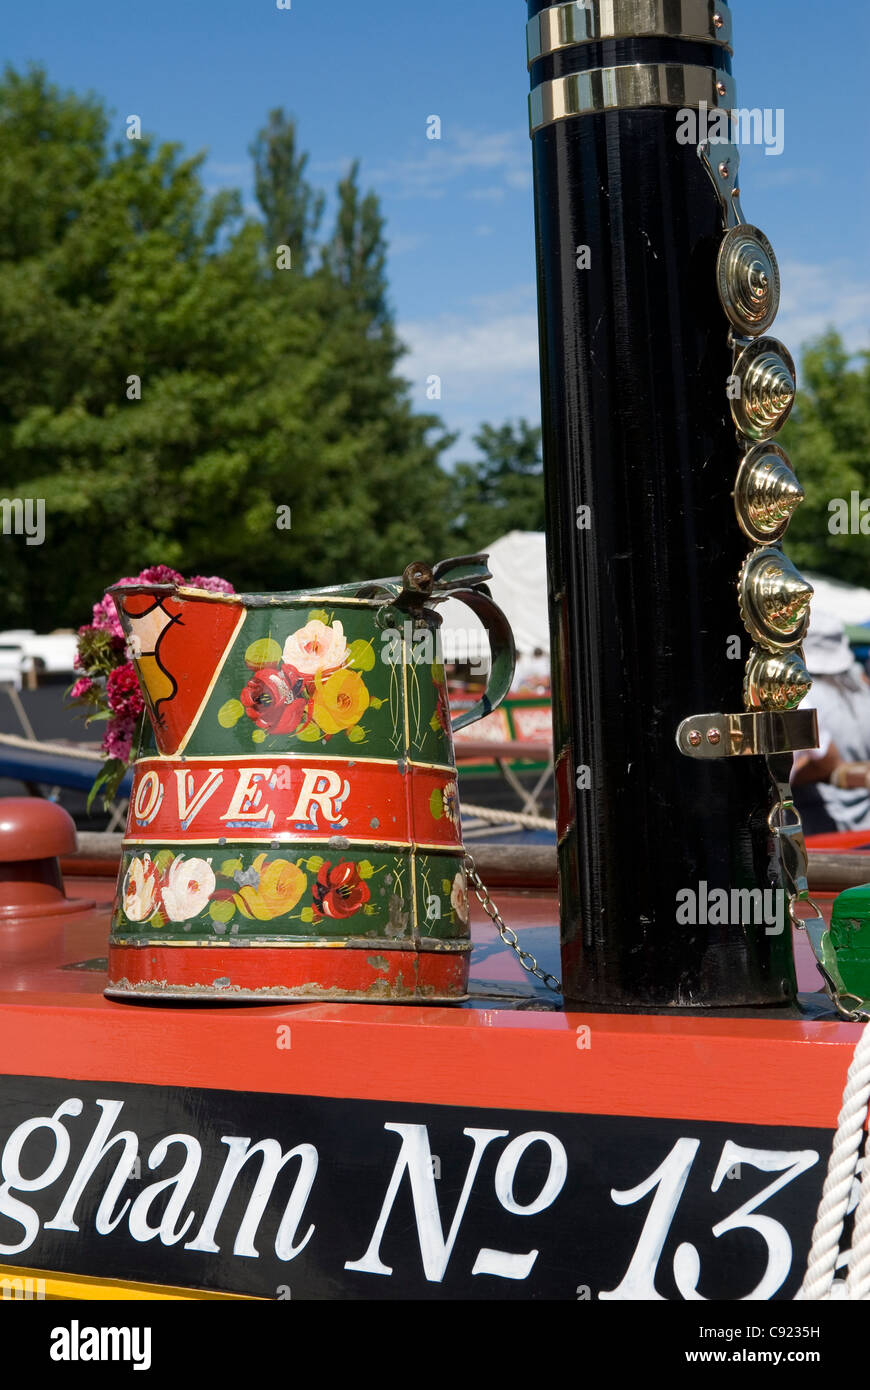 Grand Union Canal. A colourful painted pot and chimney adorned with polished brasses on a narrowboat at the Braunston Historic Stock Photo